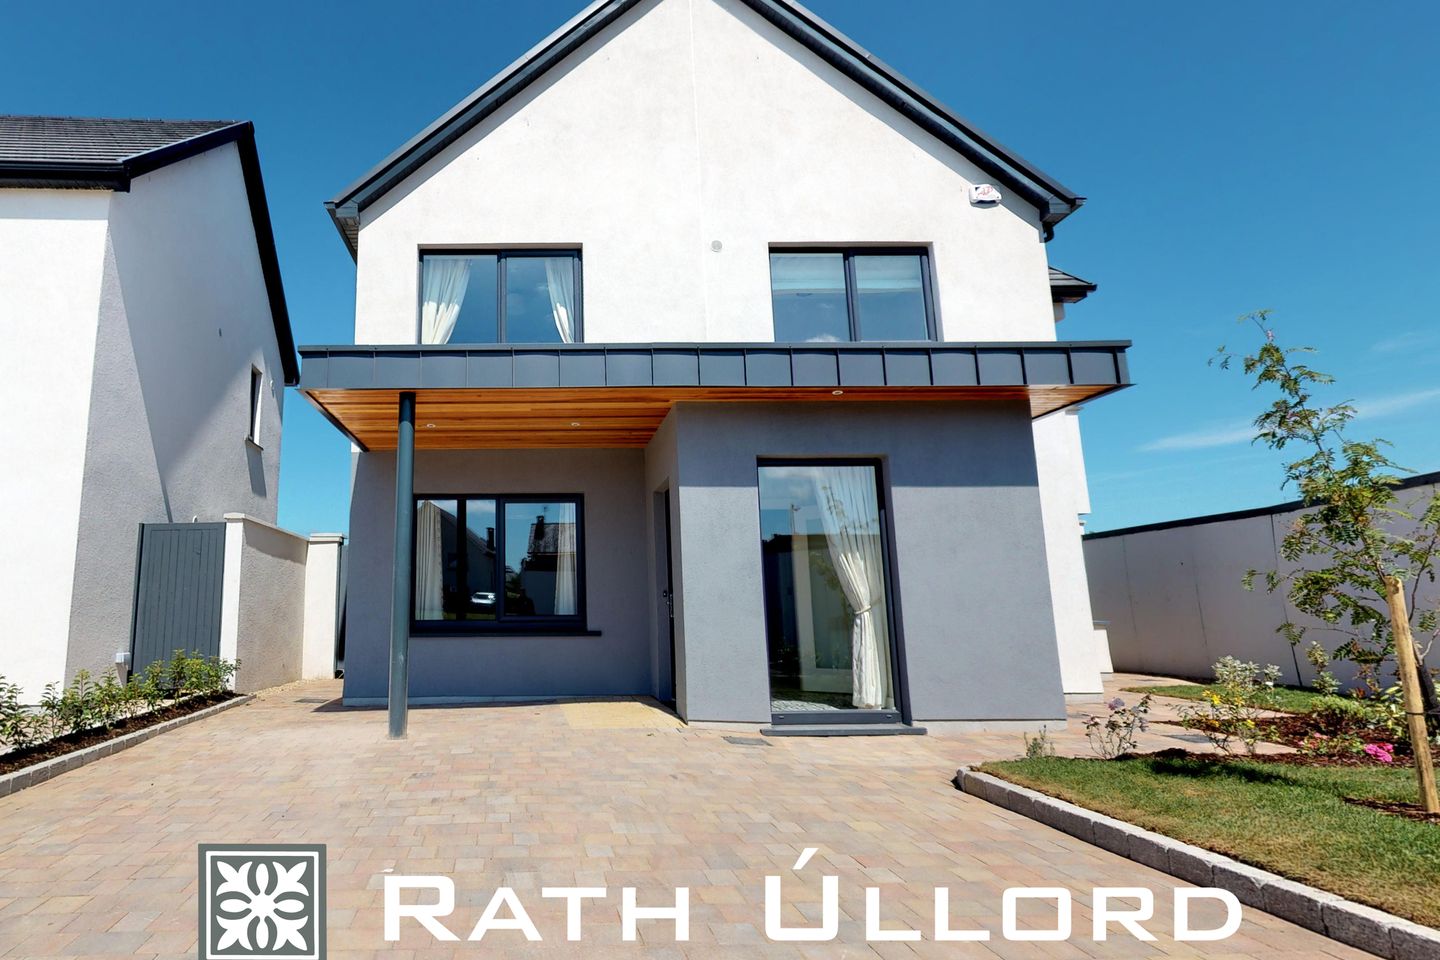 House Type C, Rath Ullord, Rath Ullord, New Orchard, Kilkenny, Co. Kilkenny